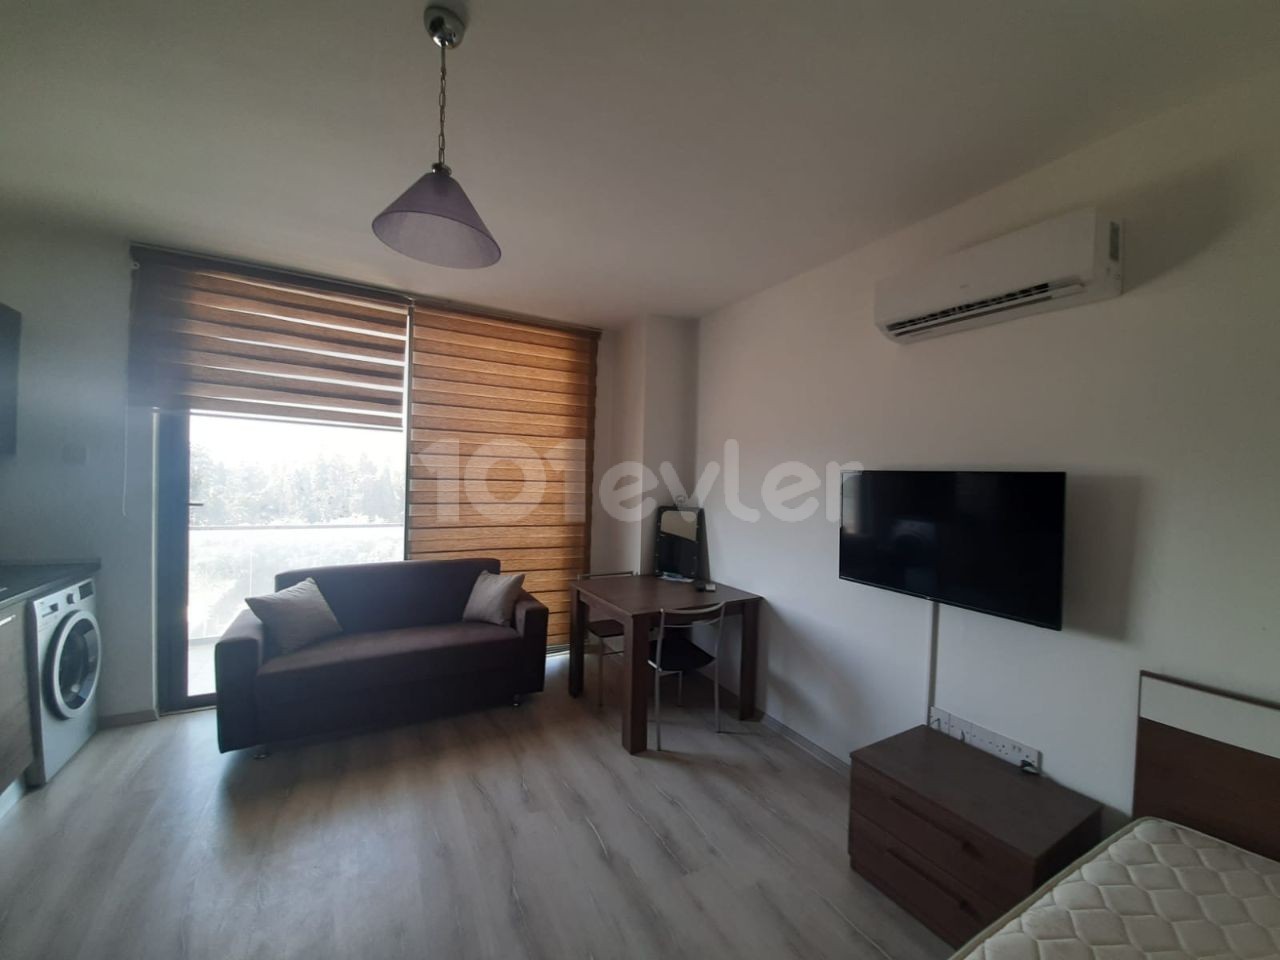 FAMAGUSTA UPTOWN 1+0 STUDIO READY FOR RENT 4.FLOOR PER MONTH 300$ 6 MONTHS PAYMENT DEPOSIT AND COMMISSION APARTMAN CHARGE PER MONTH 29£